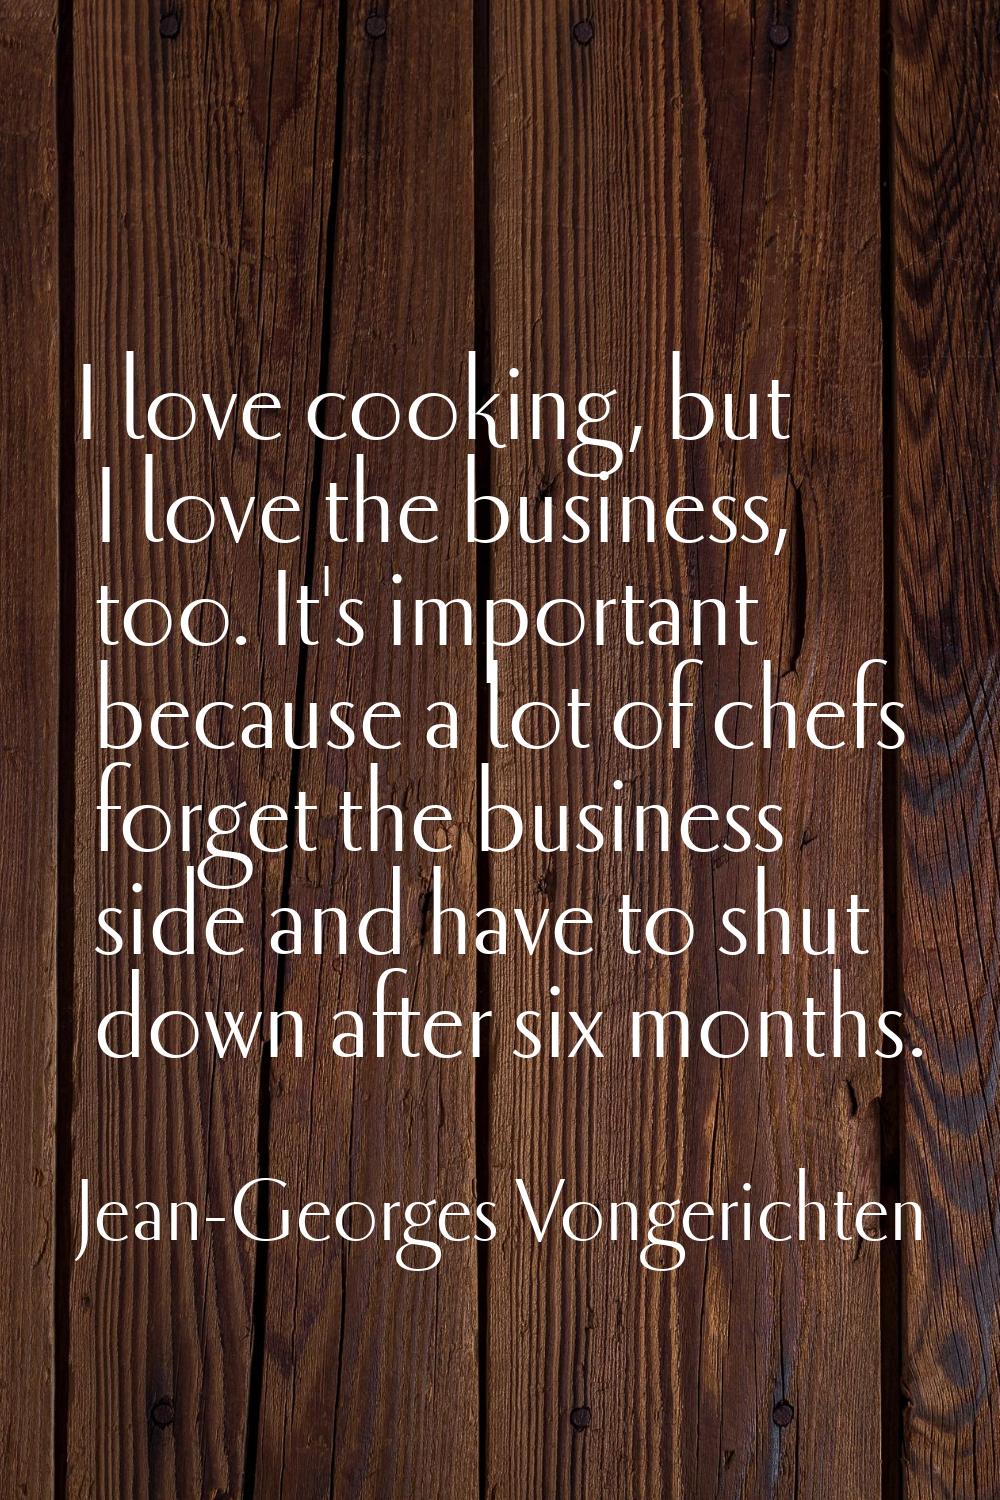 I love cooking, but I love the business, too. It's important because a lot of chefs forget the busi